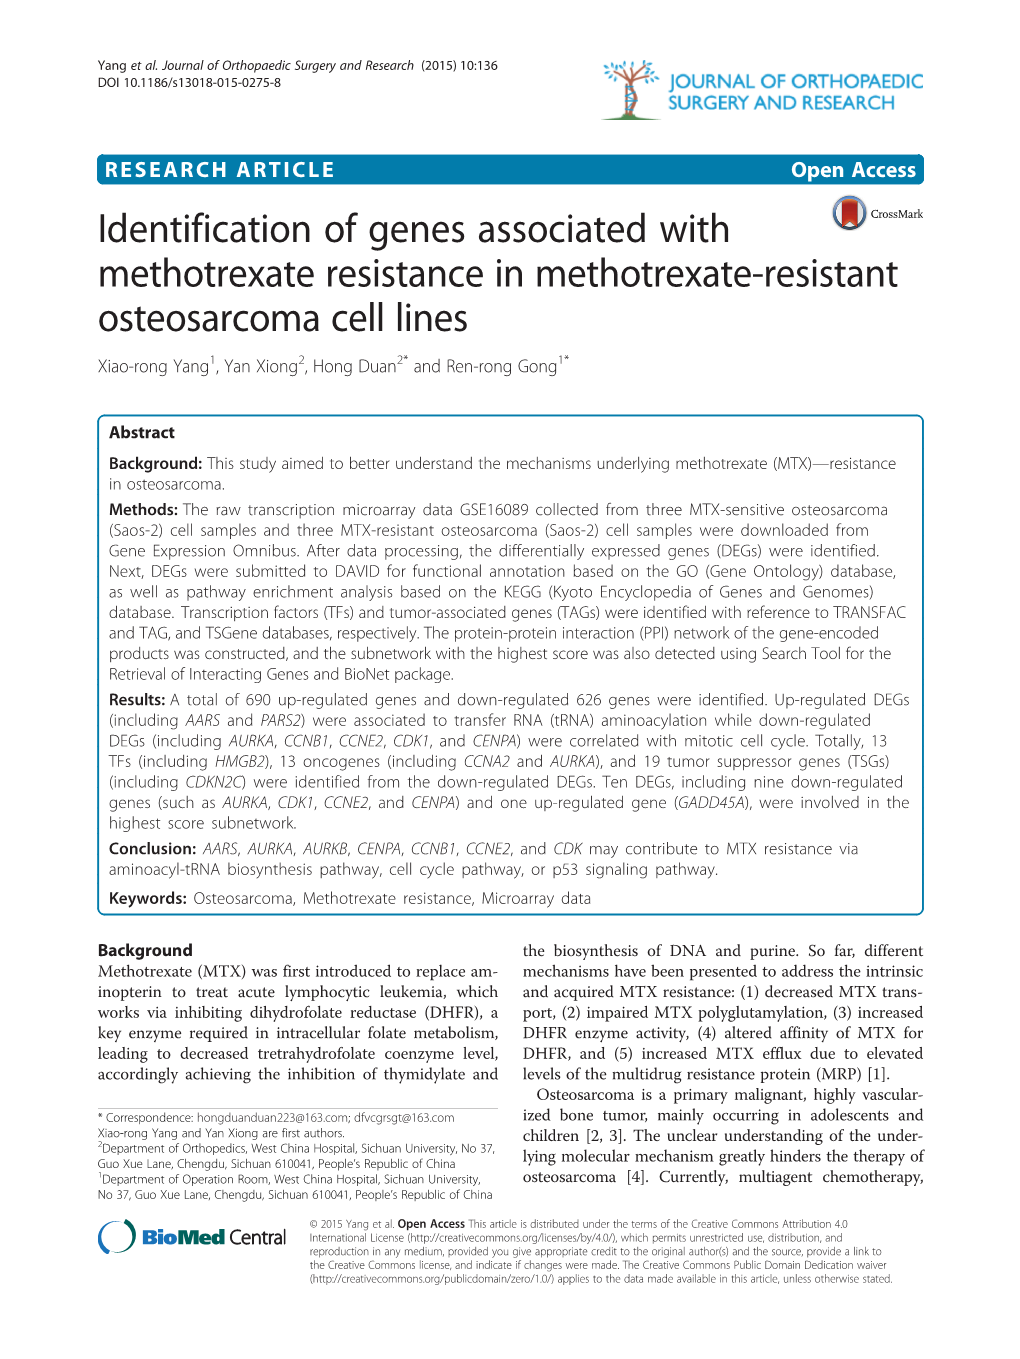 Identification of Genes Associated with Methotrexate Resistance In